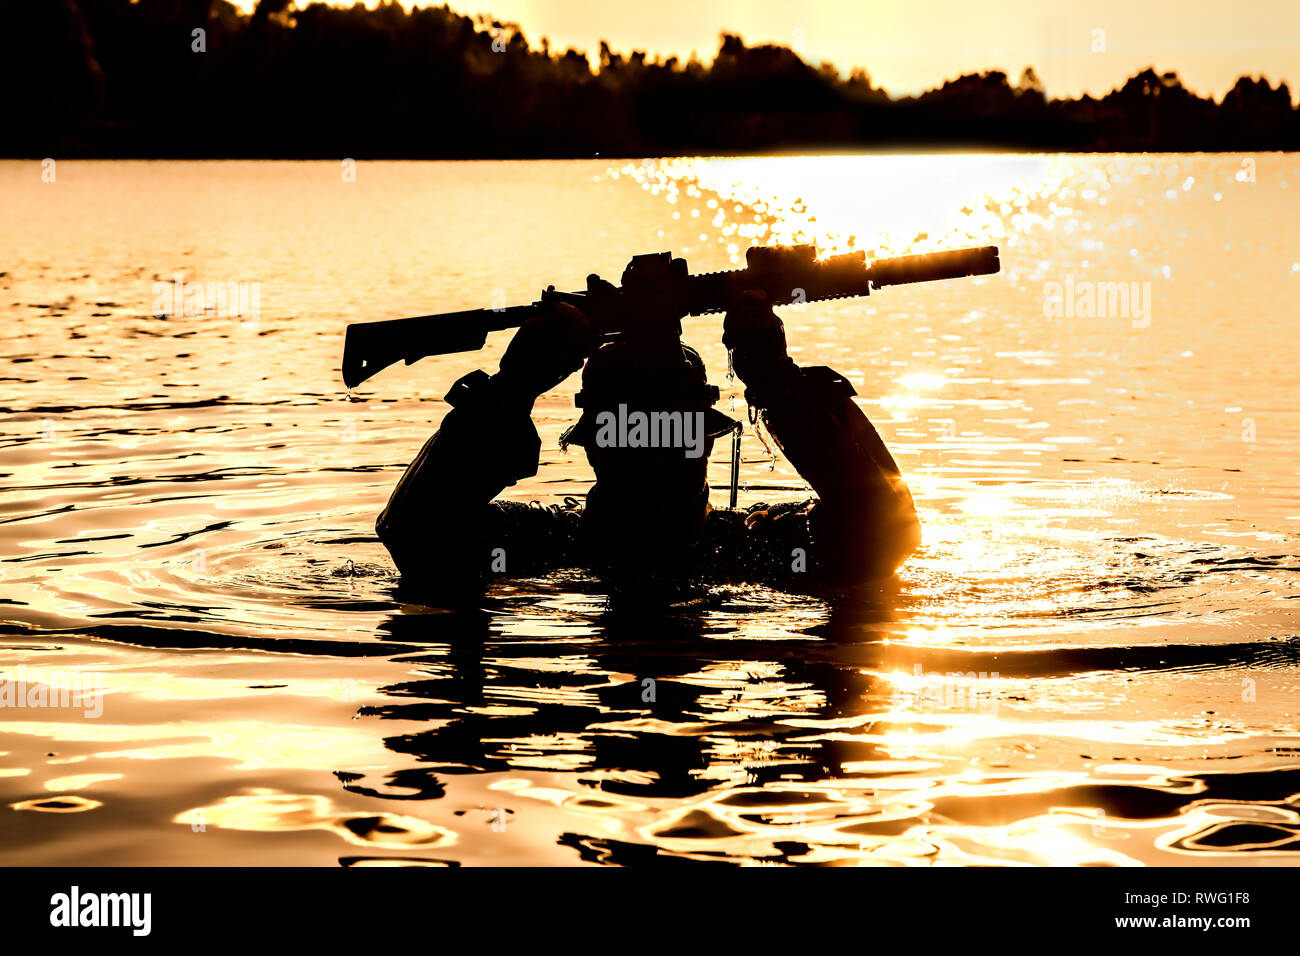 Silhouette of a special forces soldier holding weapon above head while crossing a river. Stock Photo